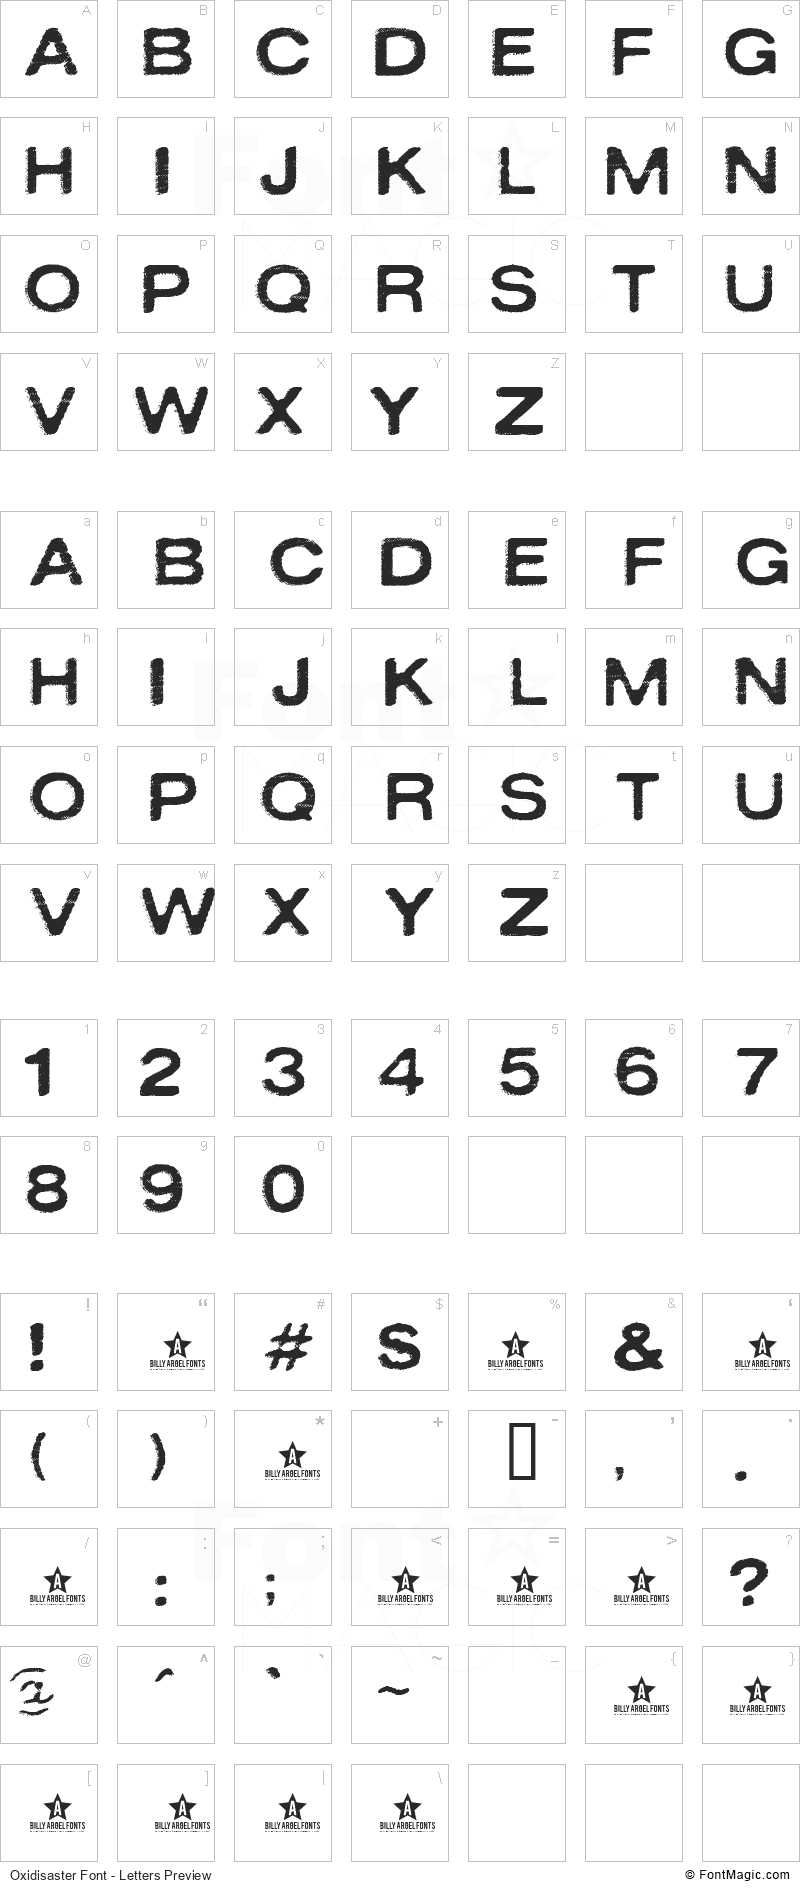 Oxidisaster Font - All Latters Preview Chart